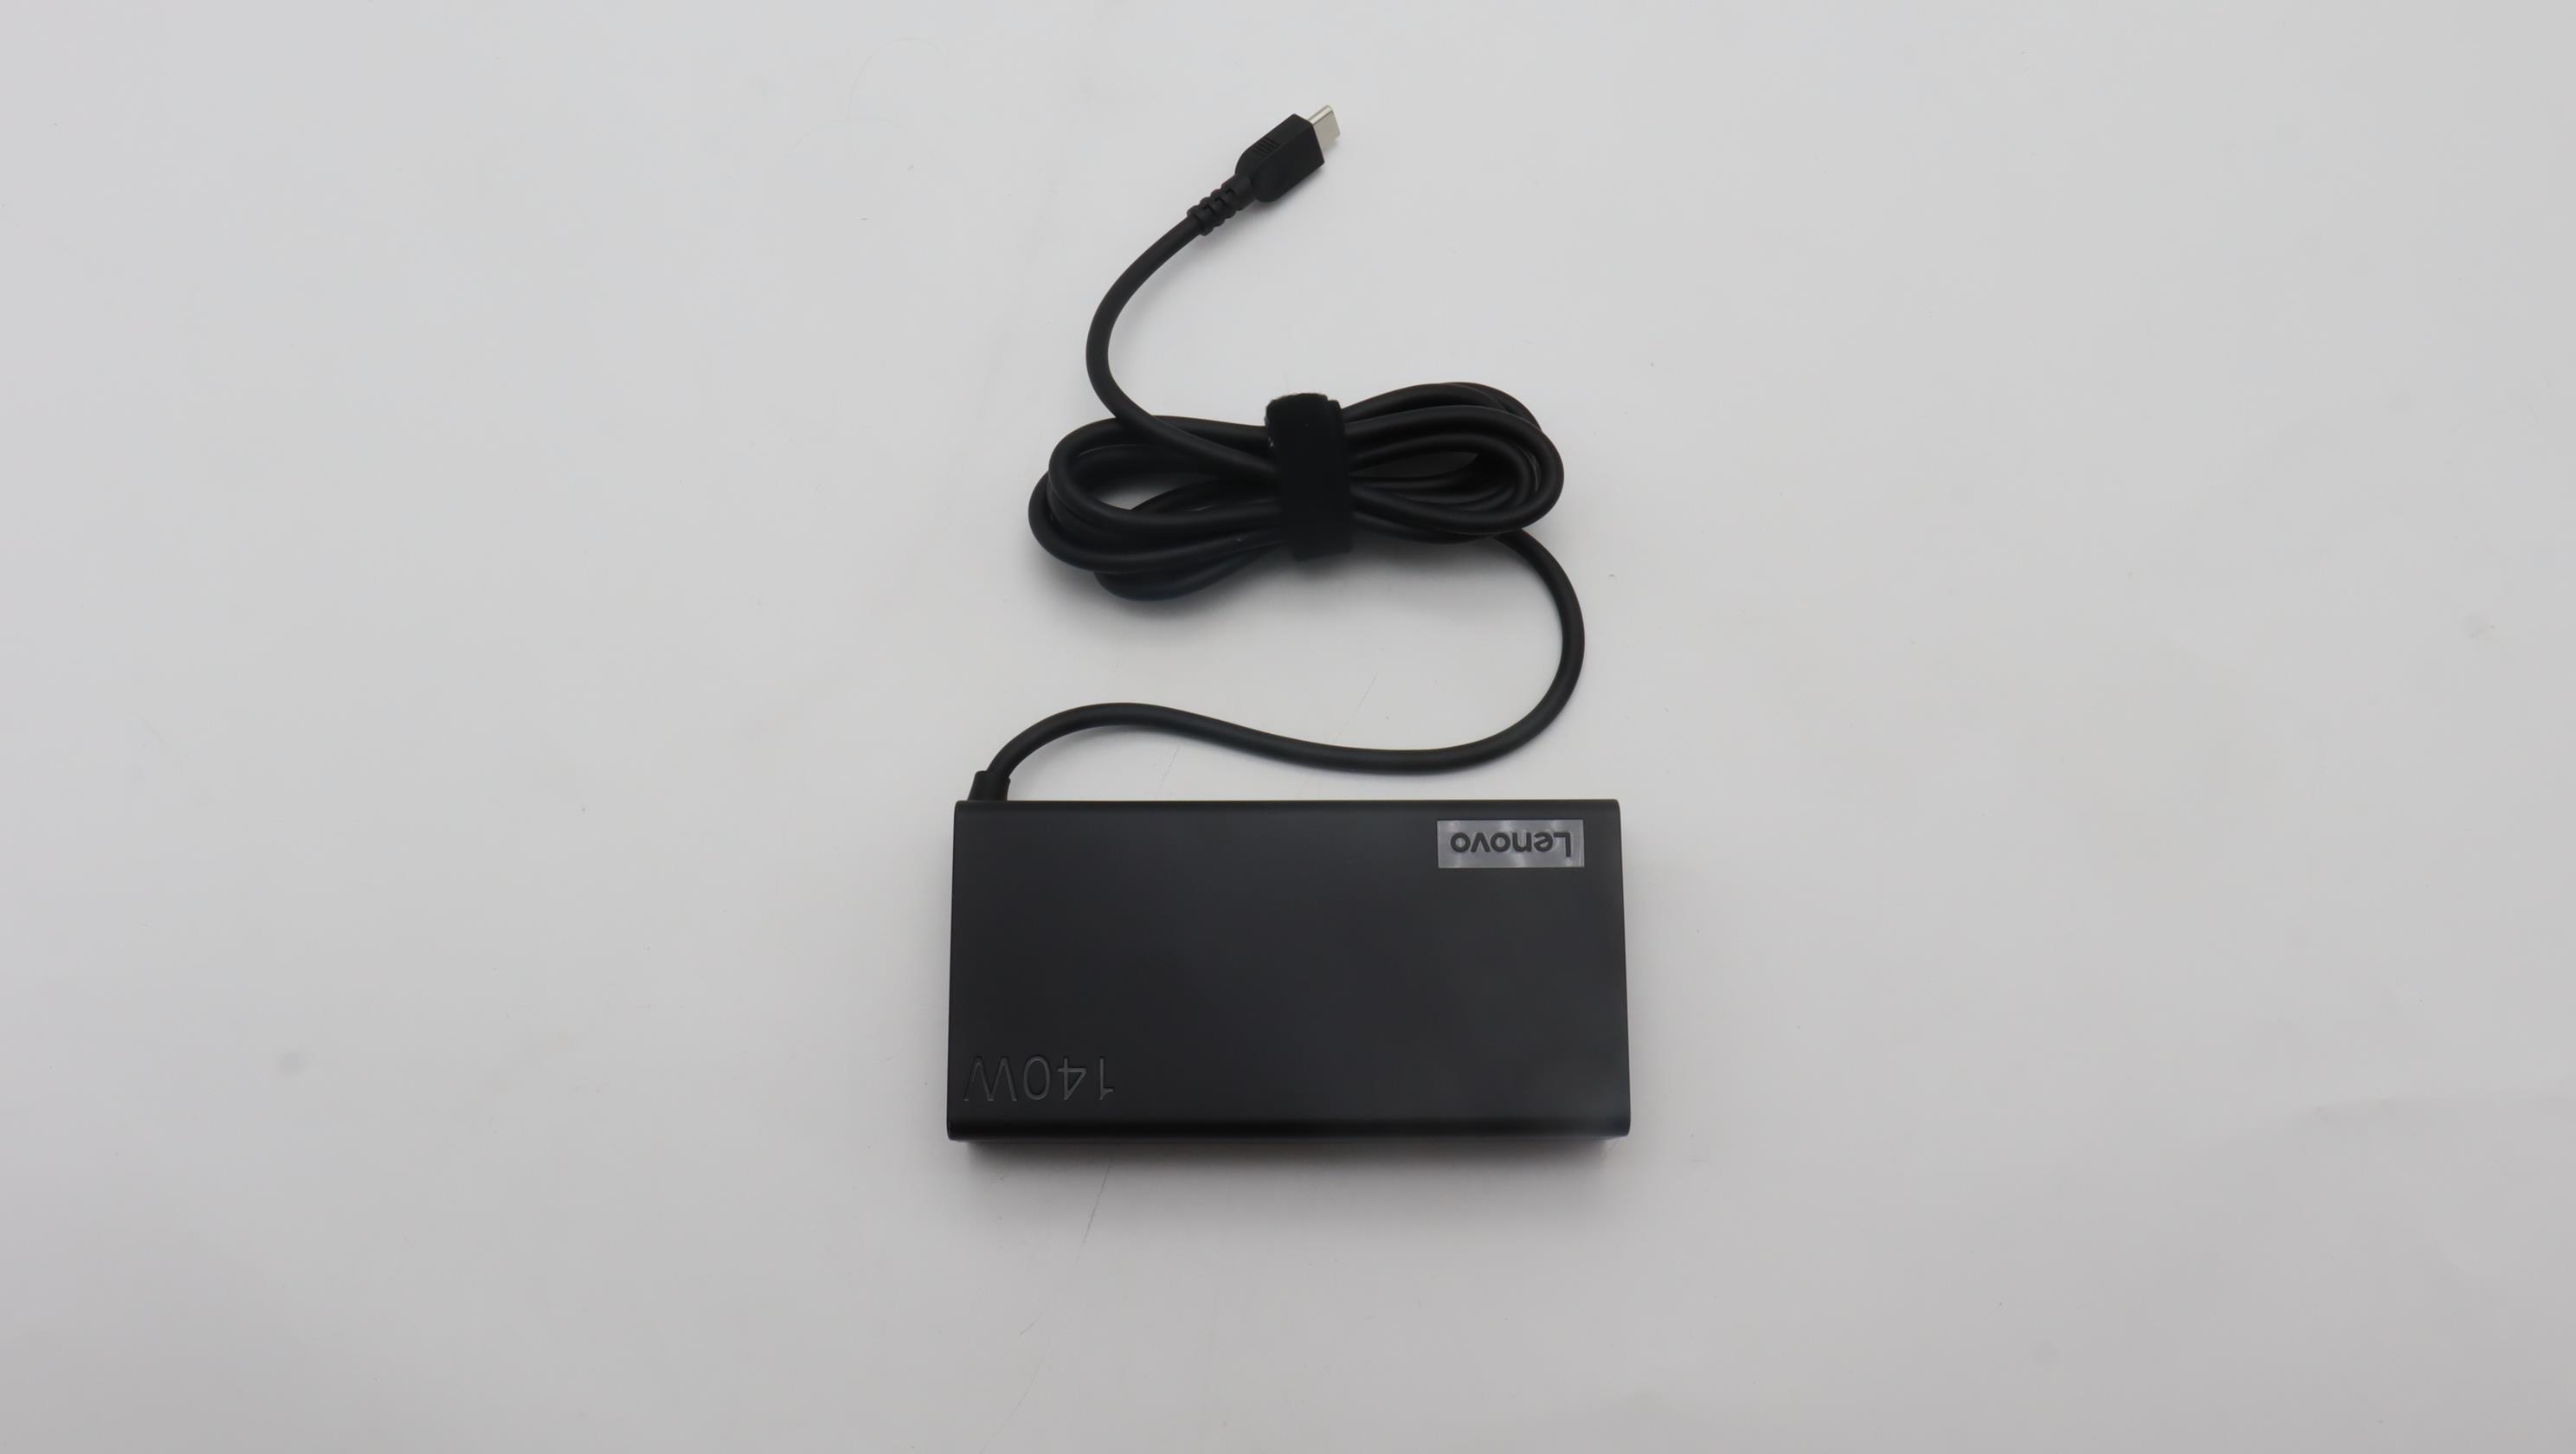 Lenovo Part  Original Lenovo Charger 140W, USB-C, AC Adapter, Power Delivery (PD), 20/15/9/5V (Includes 0.5m Power Cord)